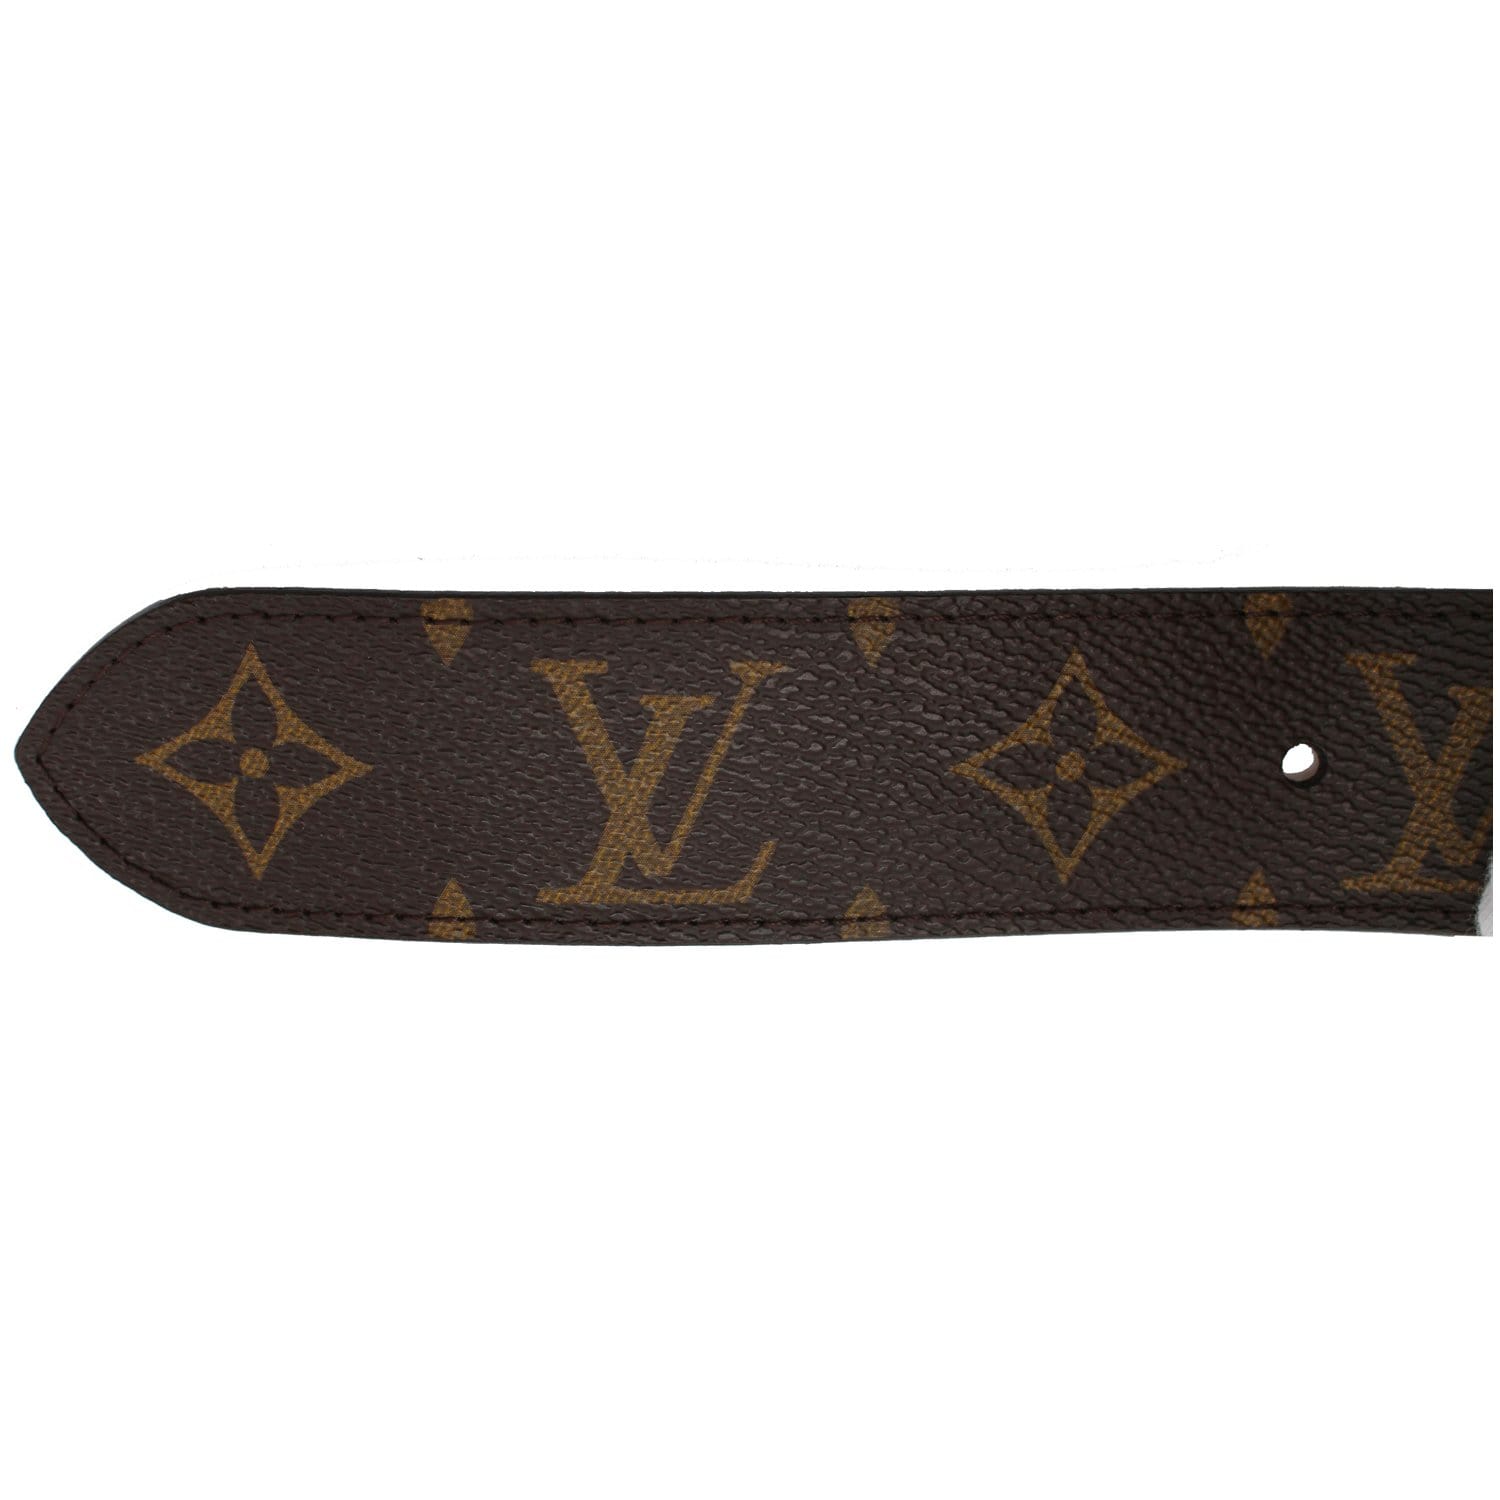 Louis Vuitton Belt Dying, resist, cutout and sewing #withGodallthingsa